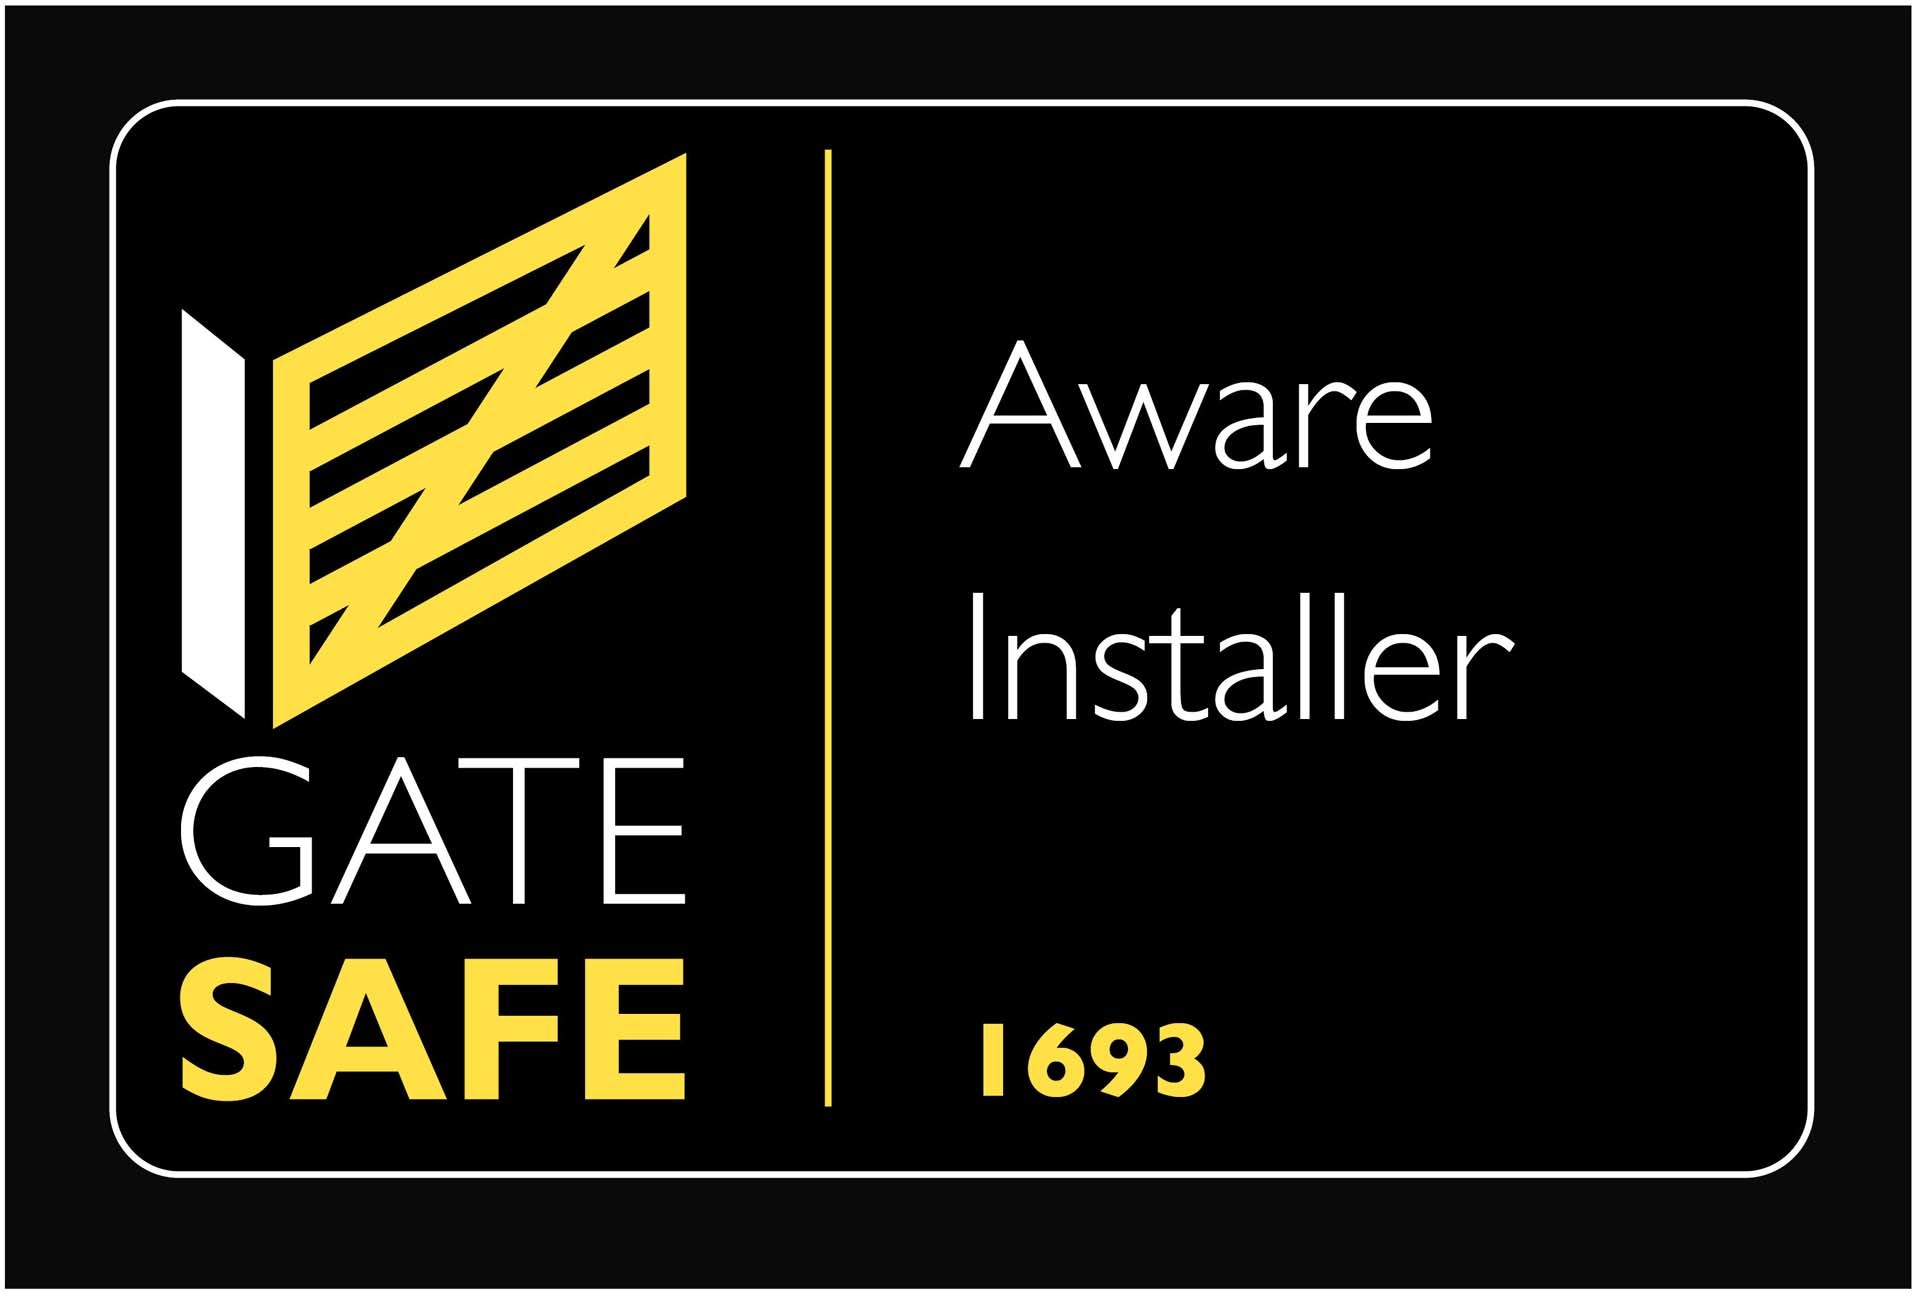 Locked and Secure are a Gate Safe Approved Installer